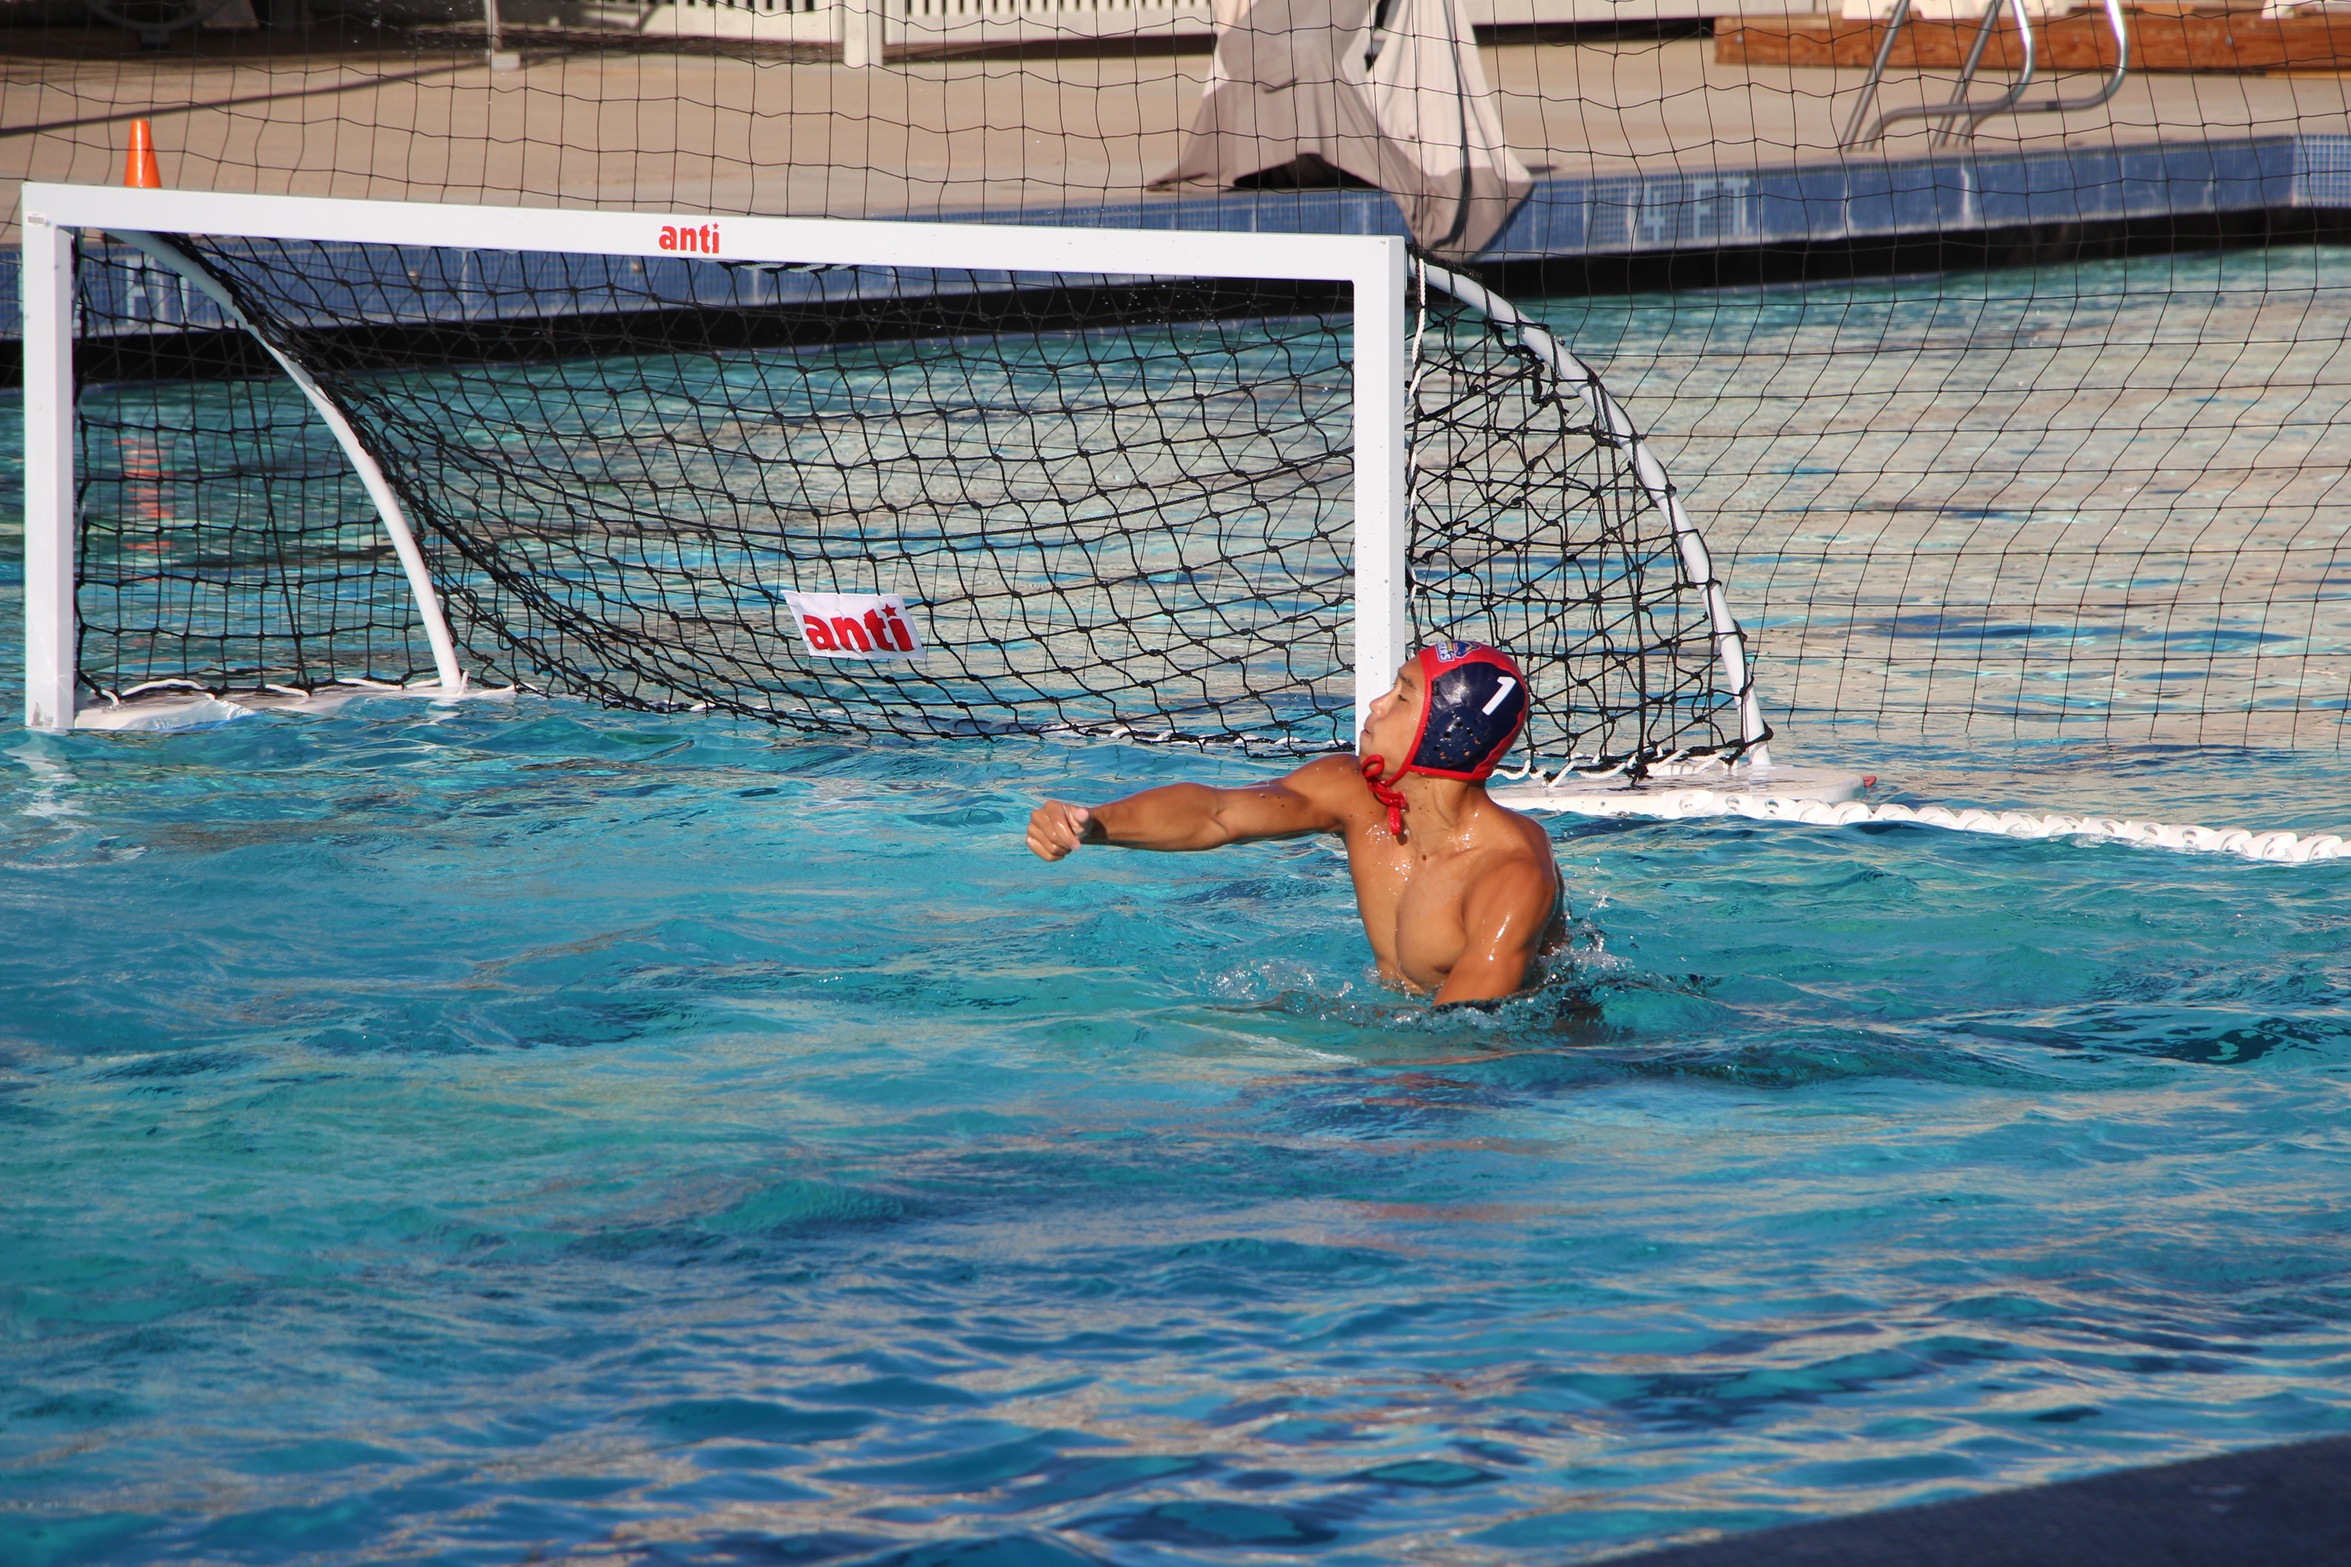 Men's Water Polo Wraps Up Season in Victory Over Fullerton, 23-3